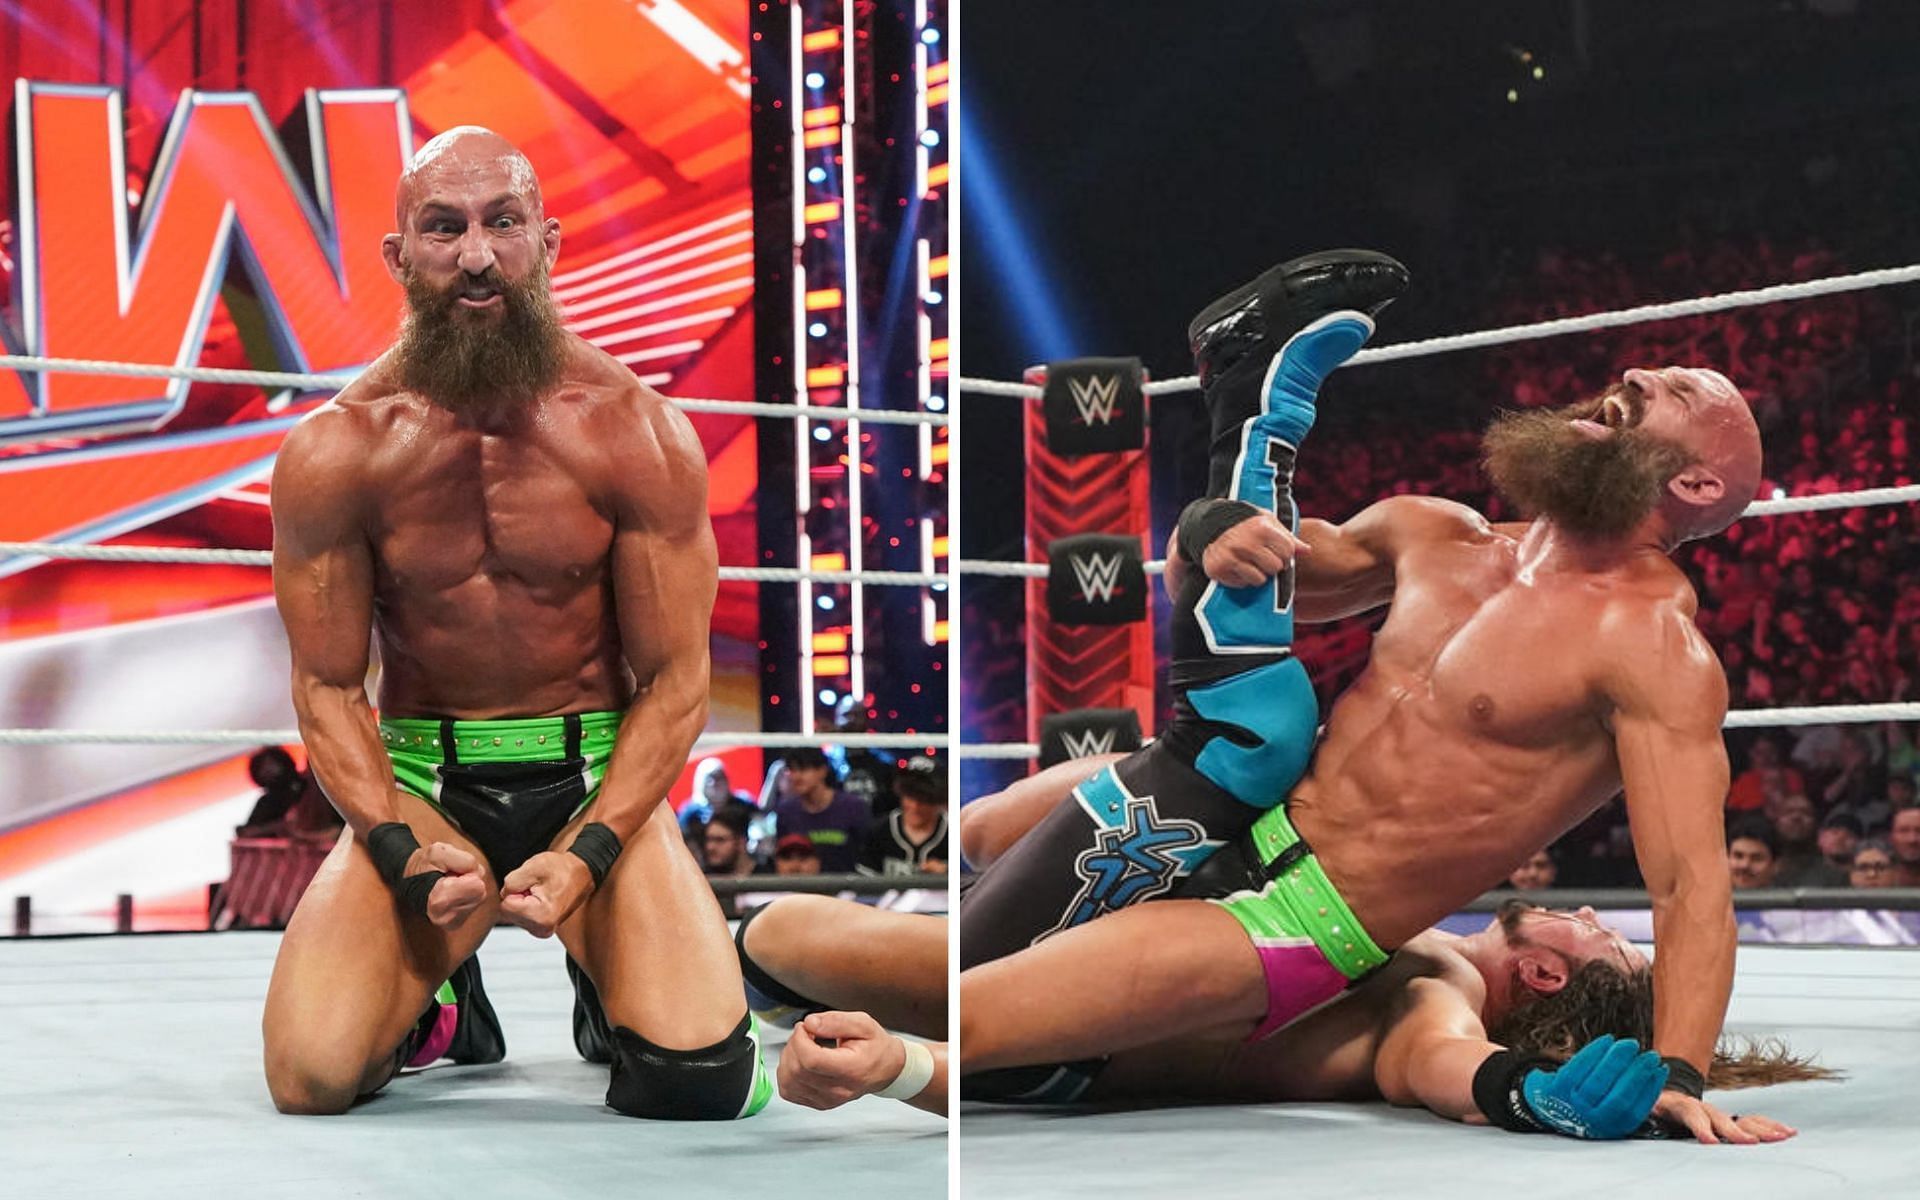 Ciampa is a former NXT Champion!